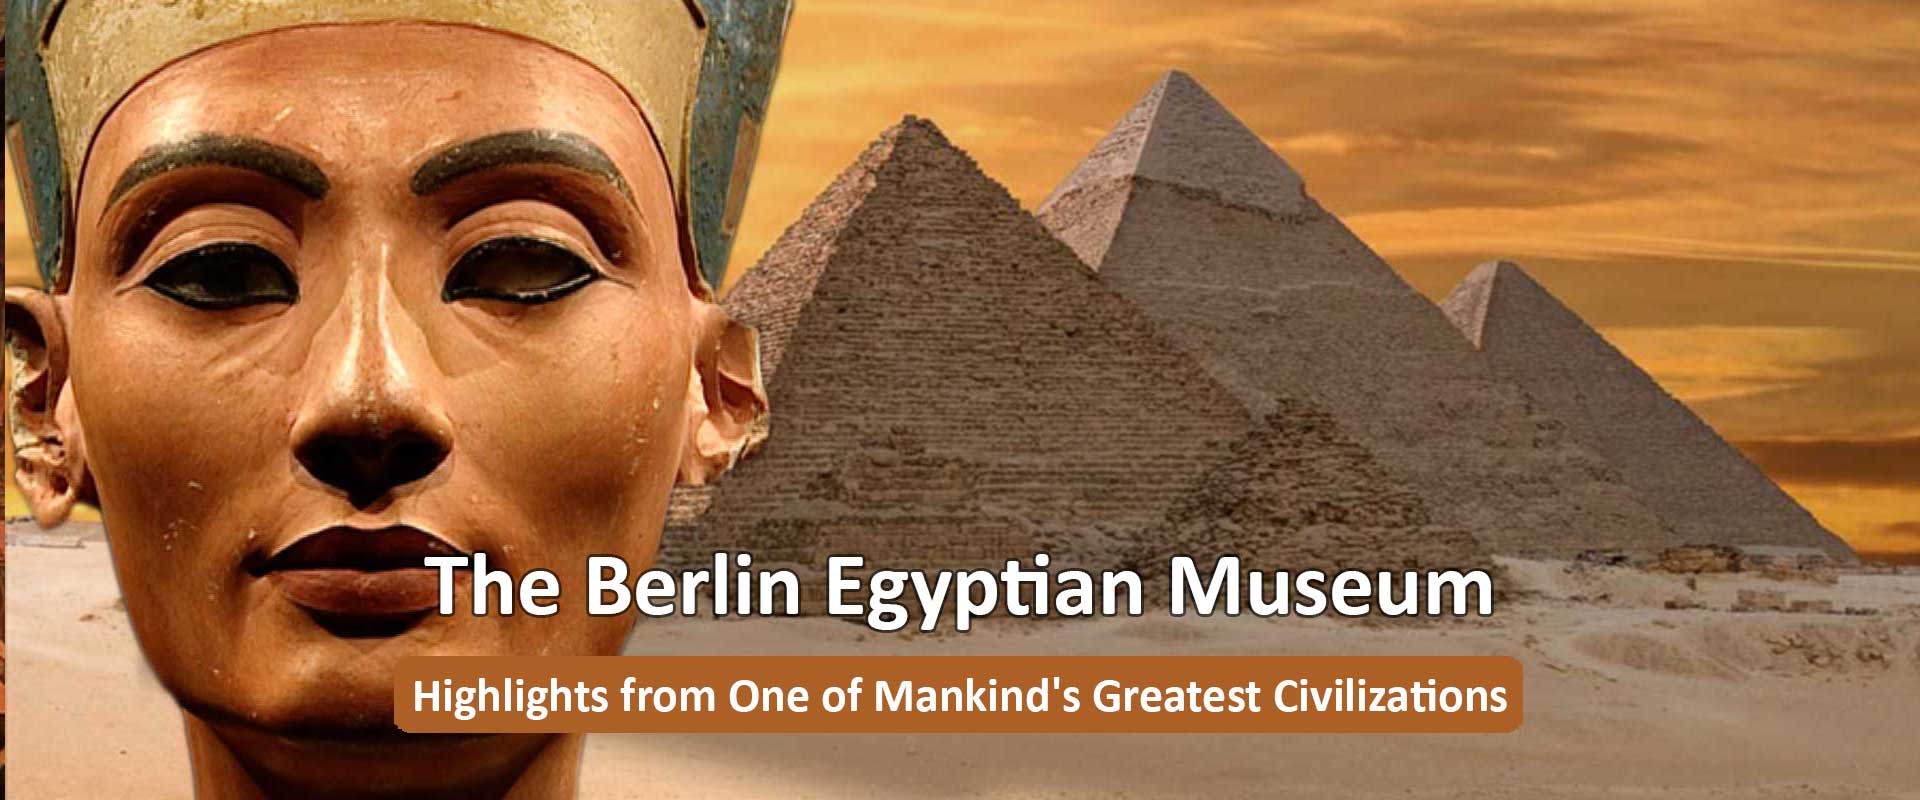 The Berlin Egyptian Museum